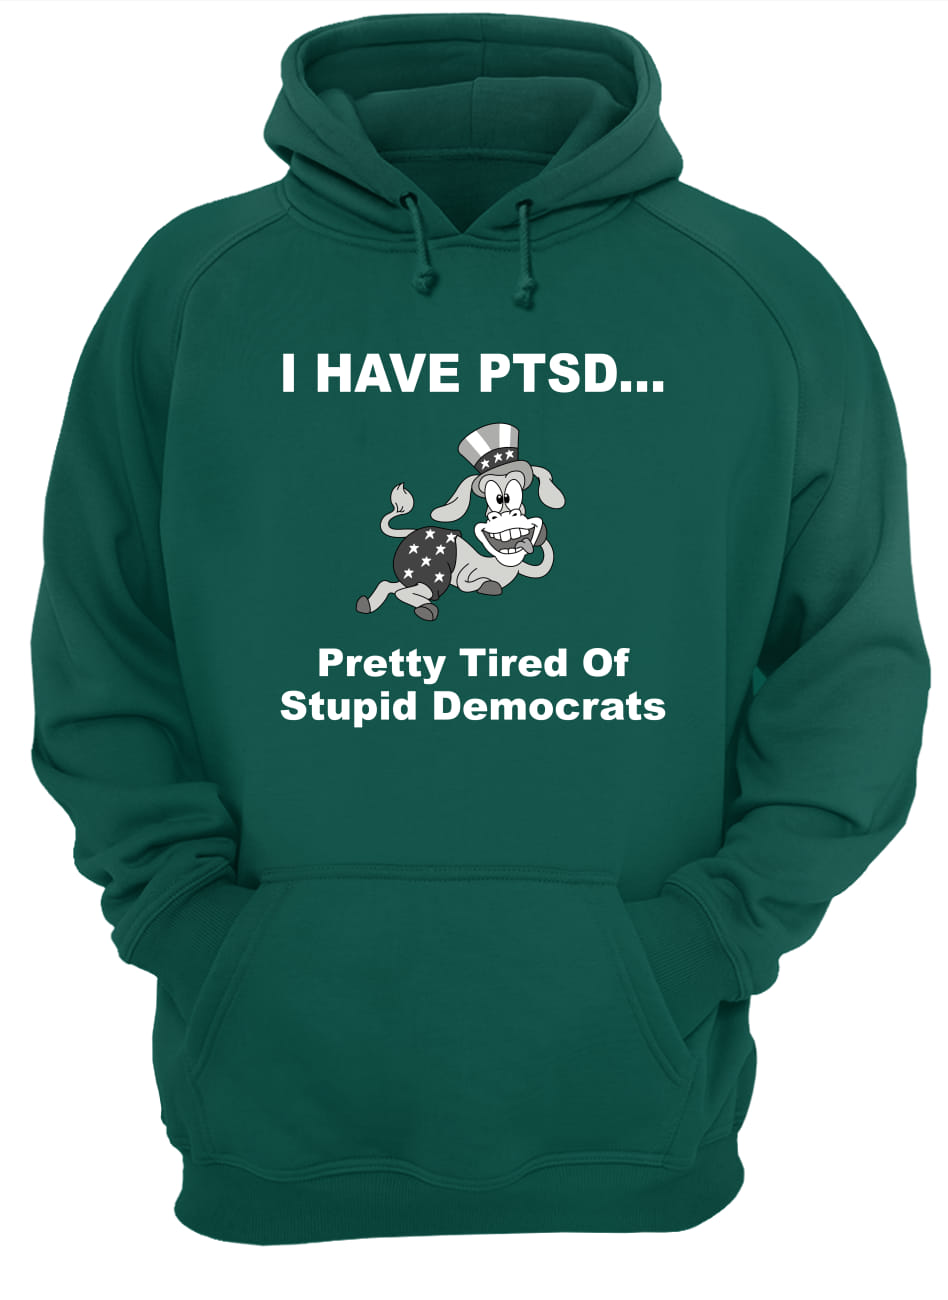 I have ptsd pretty tired or stupid democrats hoodie